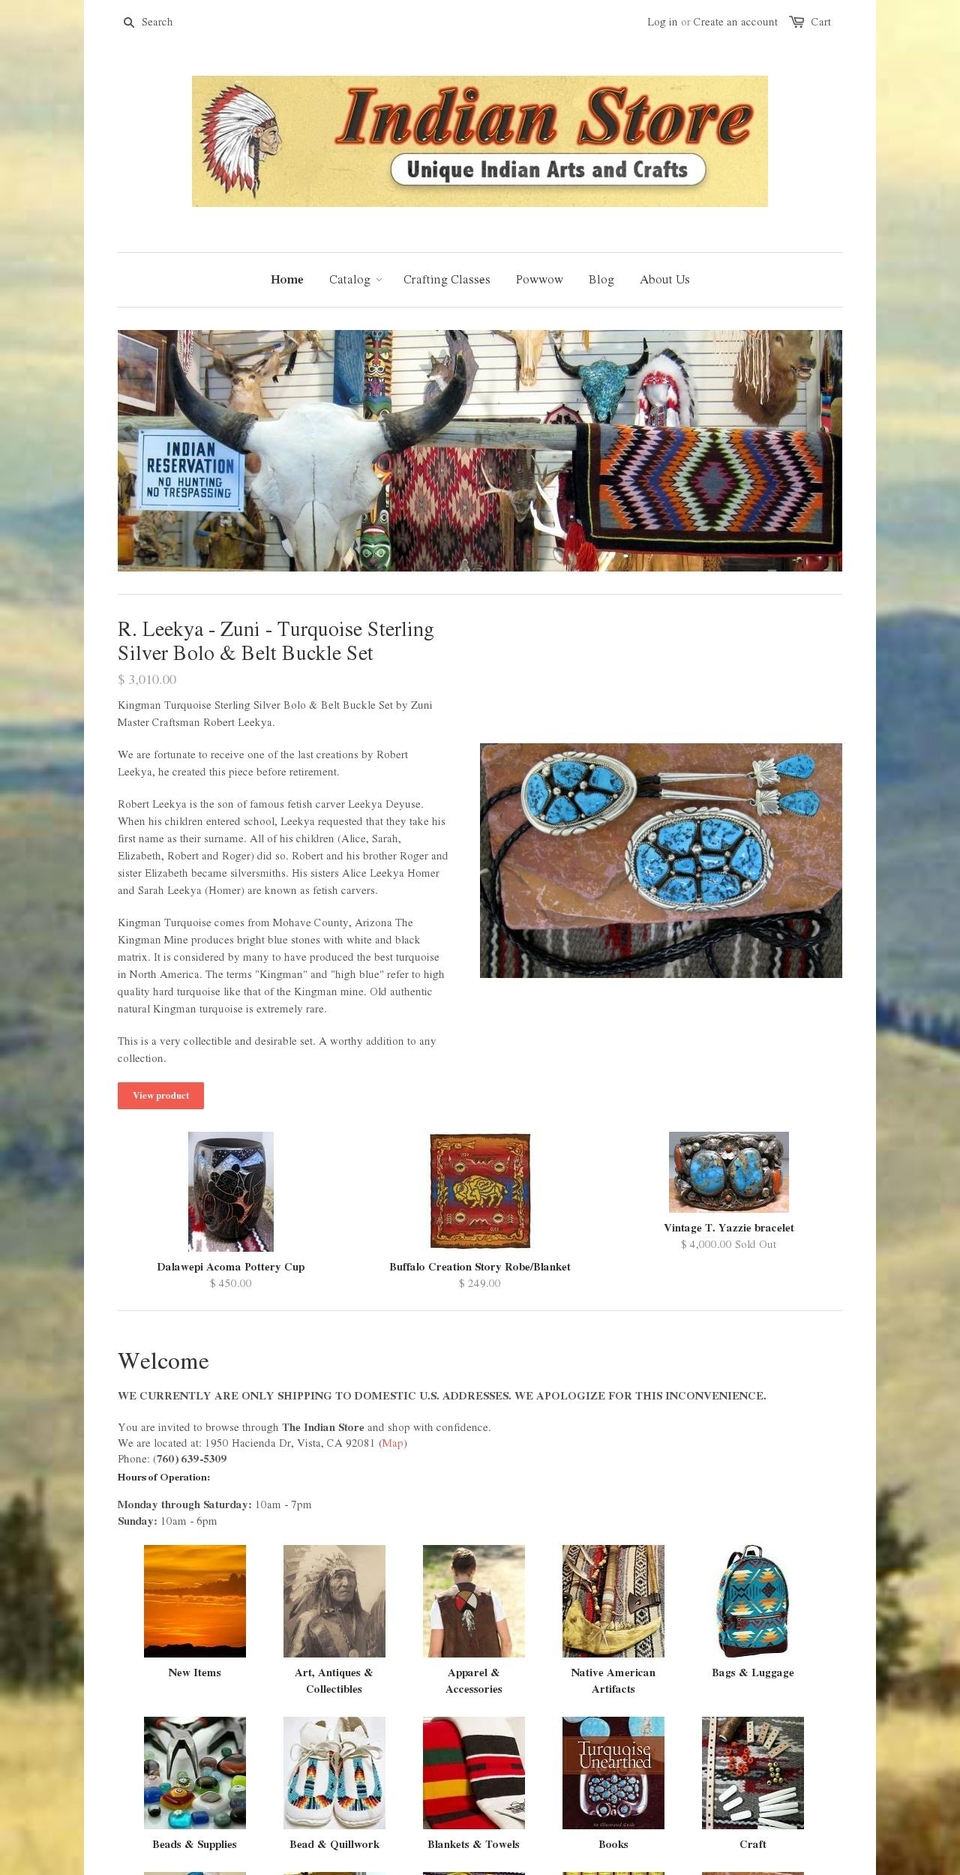 Sunrise Shopify theme site example indianstore.org